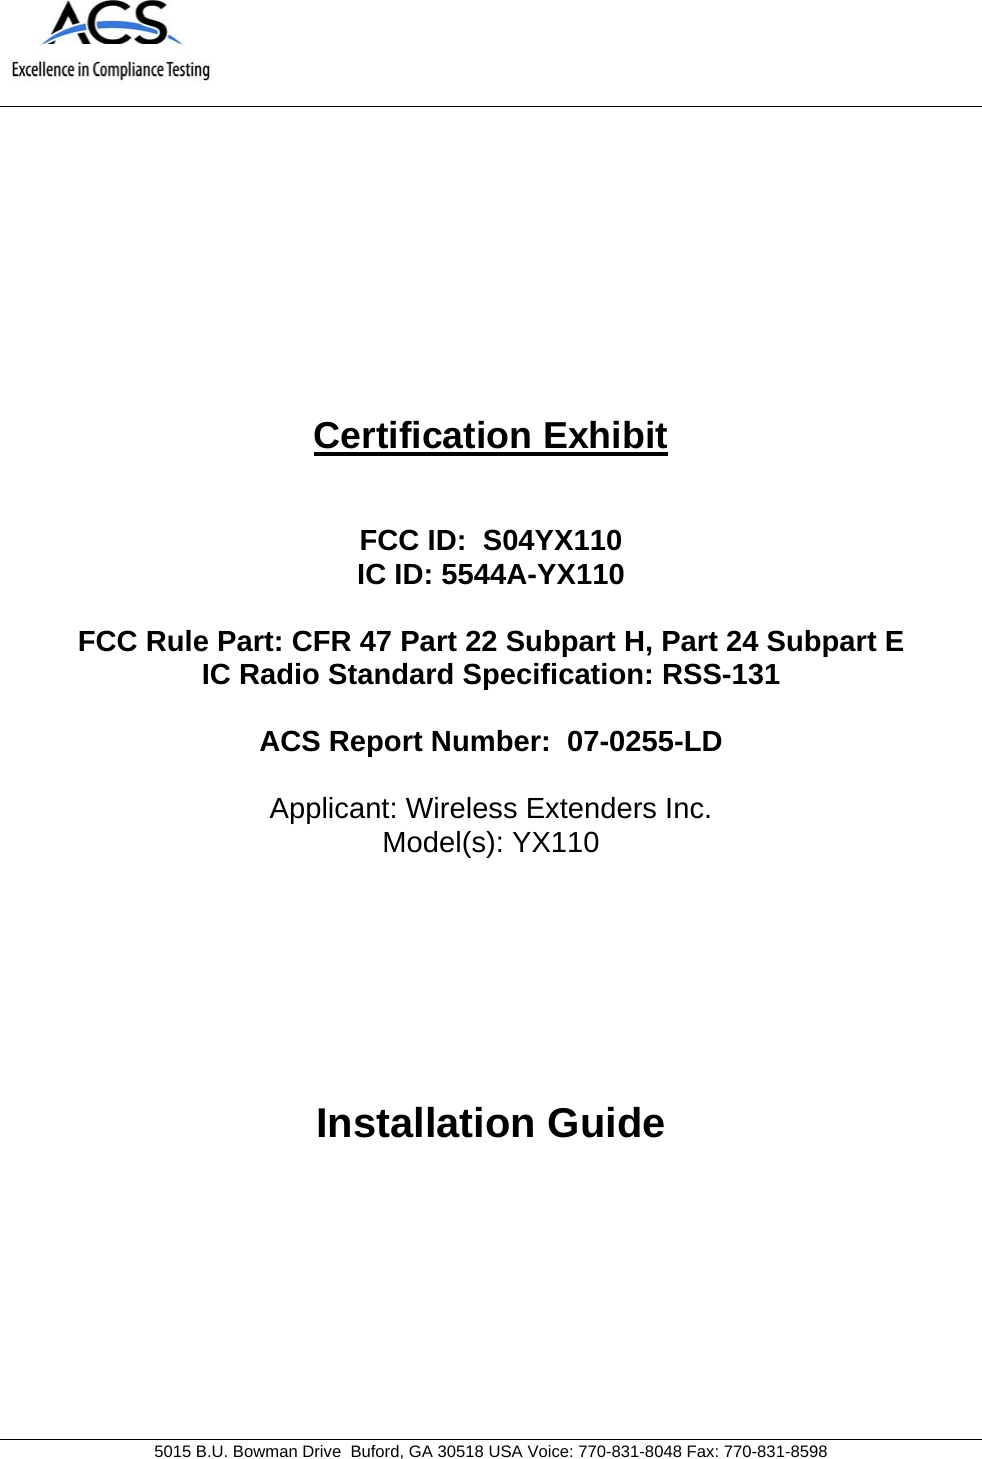                               5015 B.U. Bowman Drive  Buford, GA 30518 USA Voice: 770-831-8048 Fax: 770-831-8598         Certification Exhibit   FCC ID:  S04YX110 IC ID: 5544A-YX110  FCC Rule Part: CFR 47 Part 22 Subpart H, Part 24 Subpart E IC Radio Standard Specification: RSS-131  ACS Report Number:  07-0255-LD   Applicant: Wireless Extenders Inc. Model(s): YX110      Installation Guide       